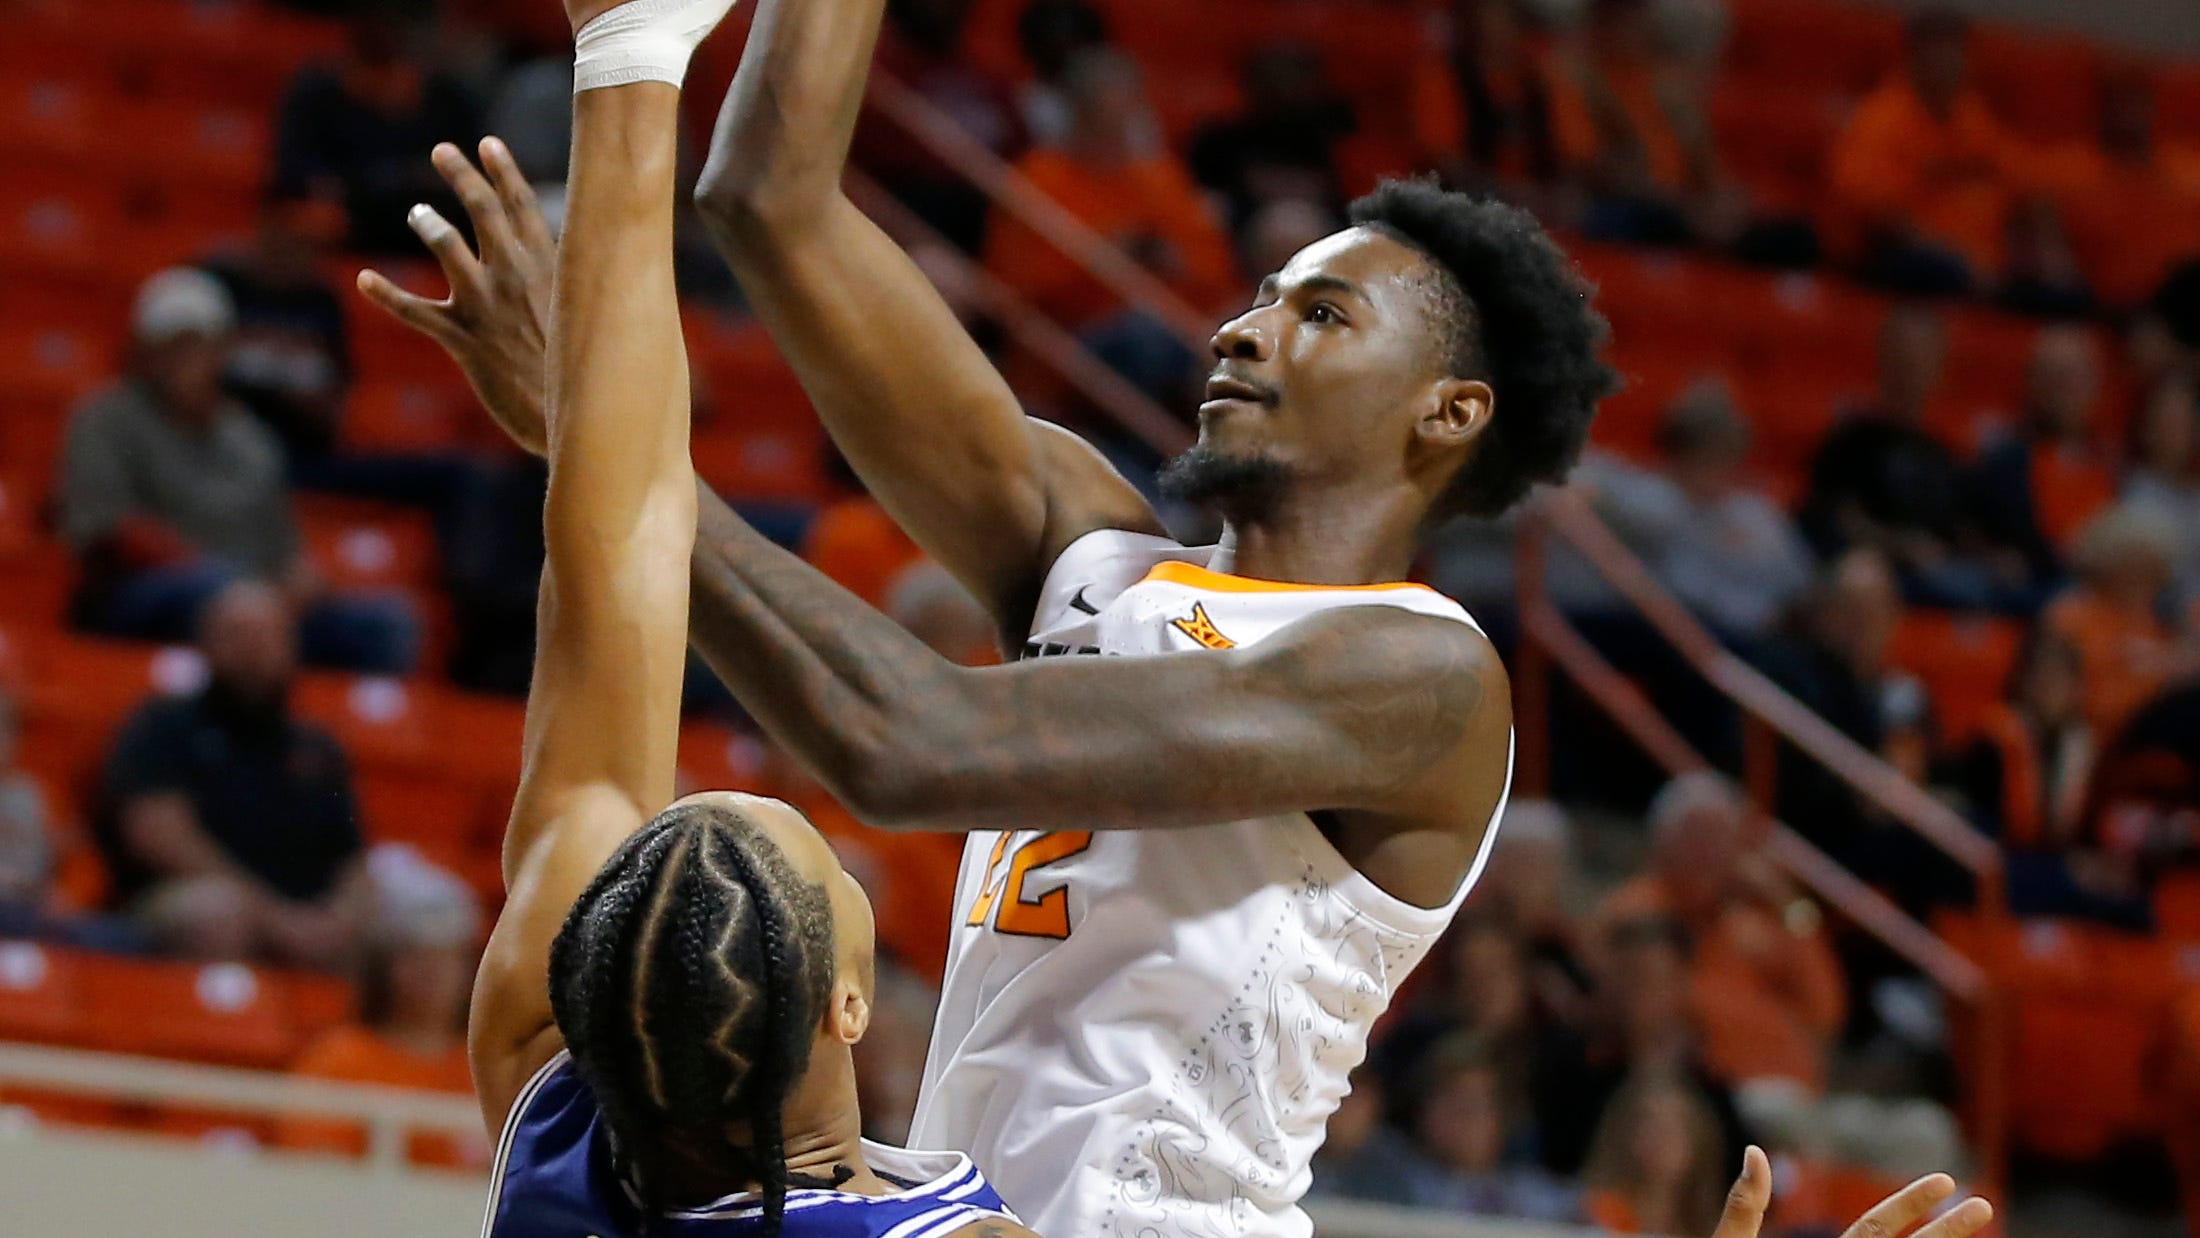 Oklahoma State vs. Tulsa men's basketball: How to watch, live stream, scouting report